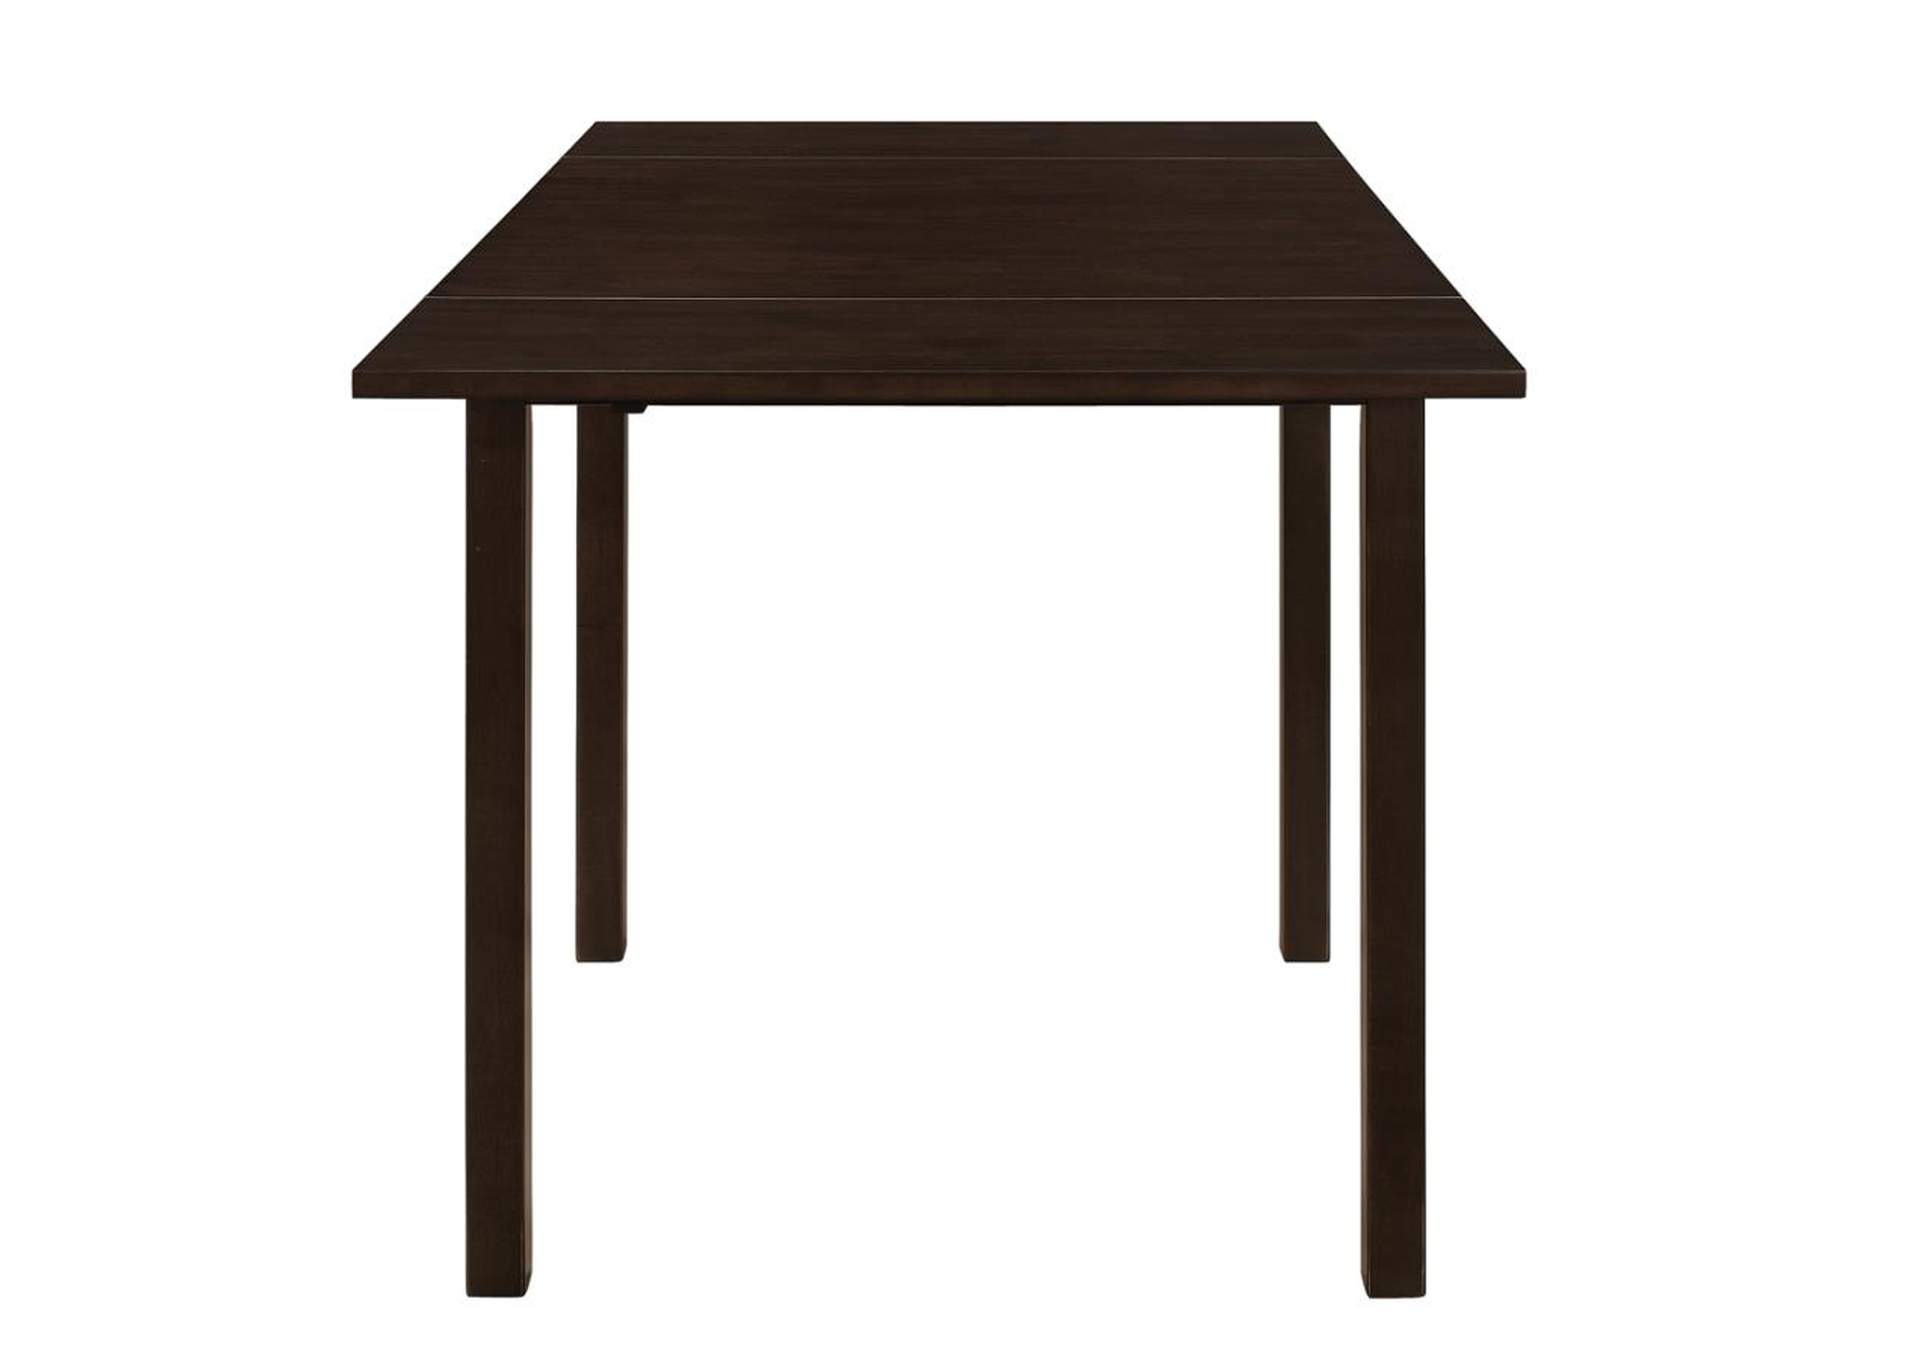 Kelso Rectangular Dining Table With Drop Leaf Cappuccino,Coaster Furniture